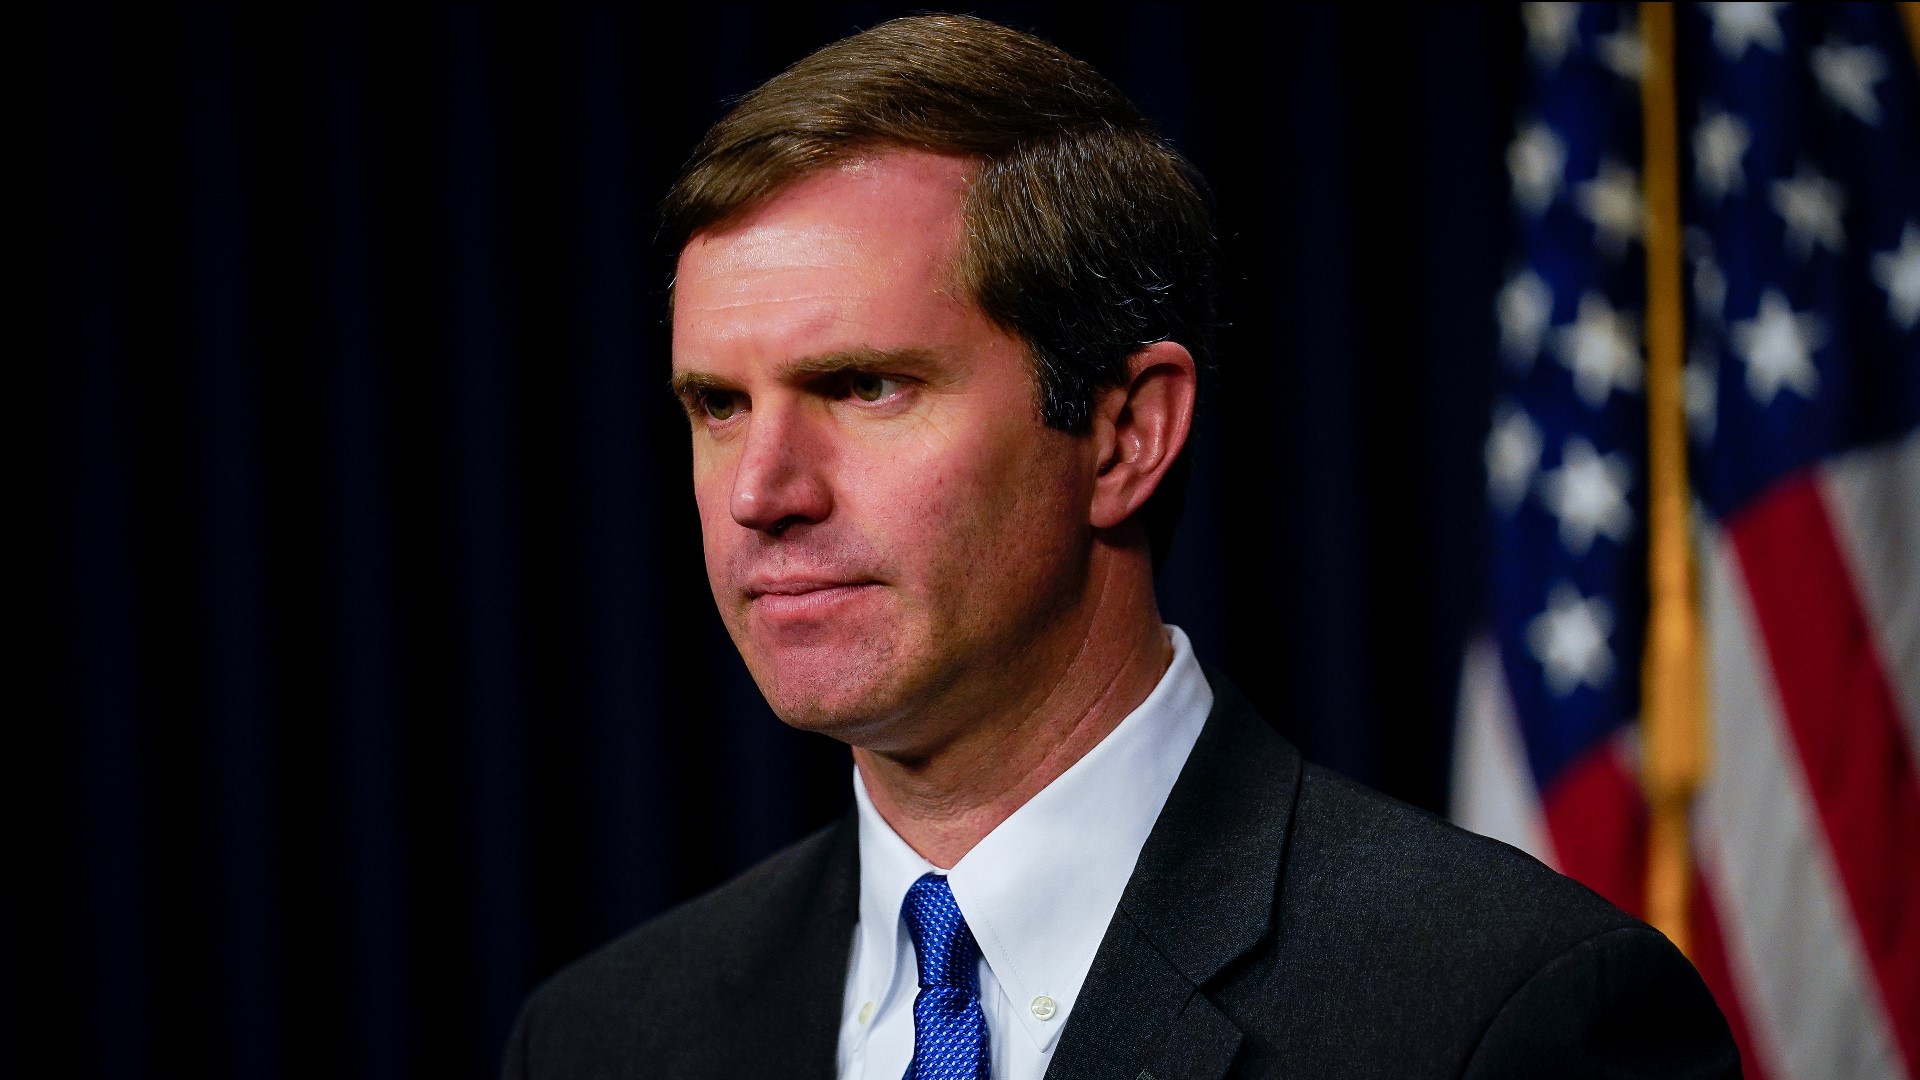 Both Gov. Beshear and those who filed a petition for his impeachment have filed their arguments in the case. If the committee sides with Beshear, it ends Wednesday.